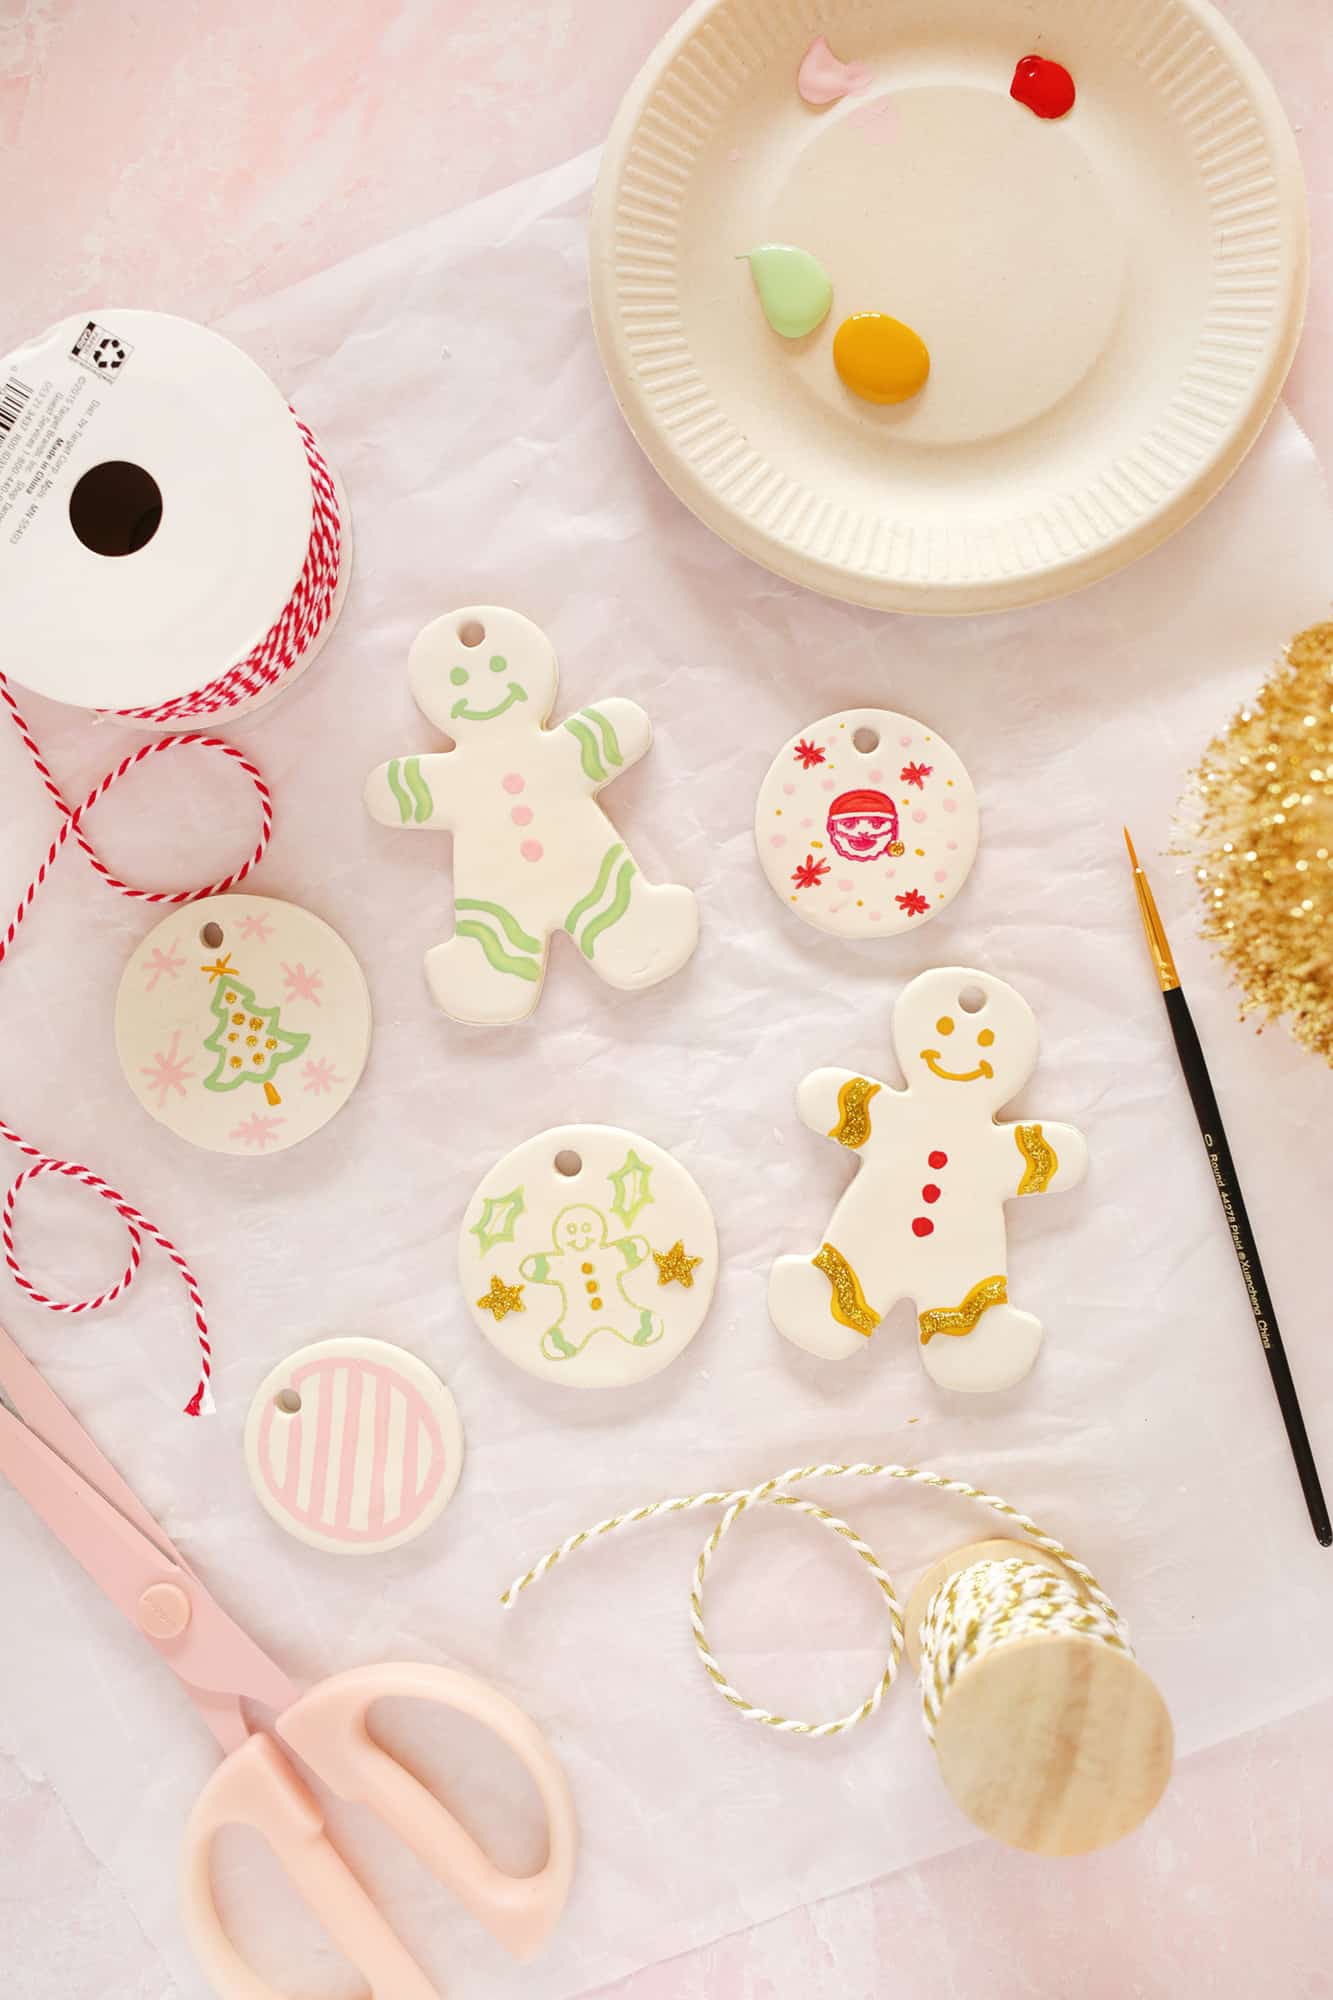 painted gingerbread people and circle ornaments made from clay 